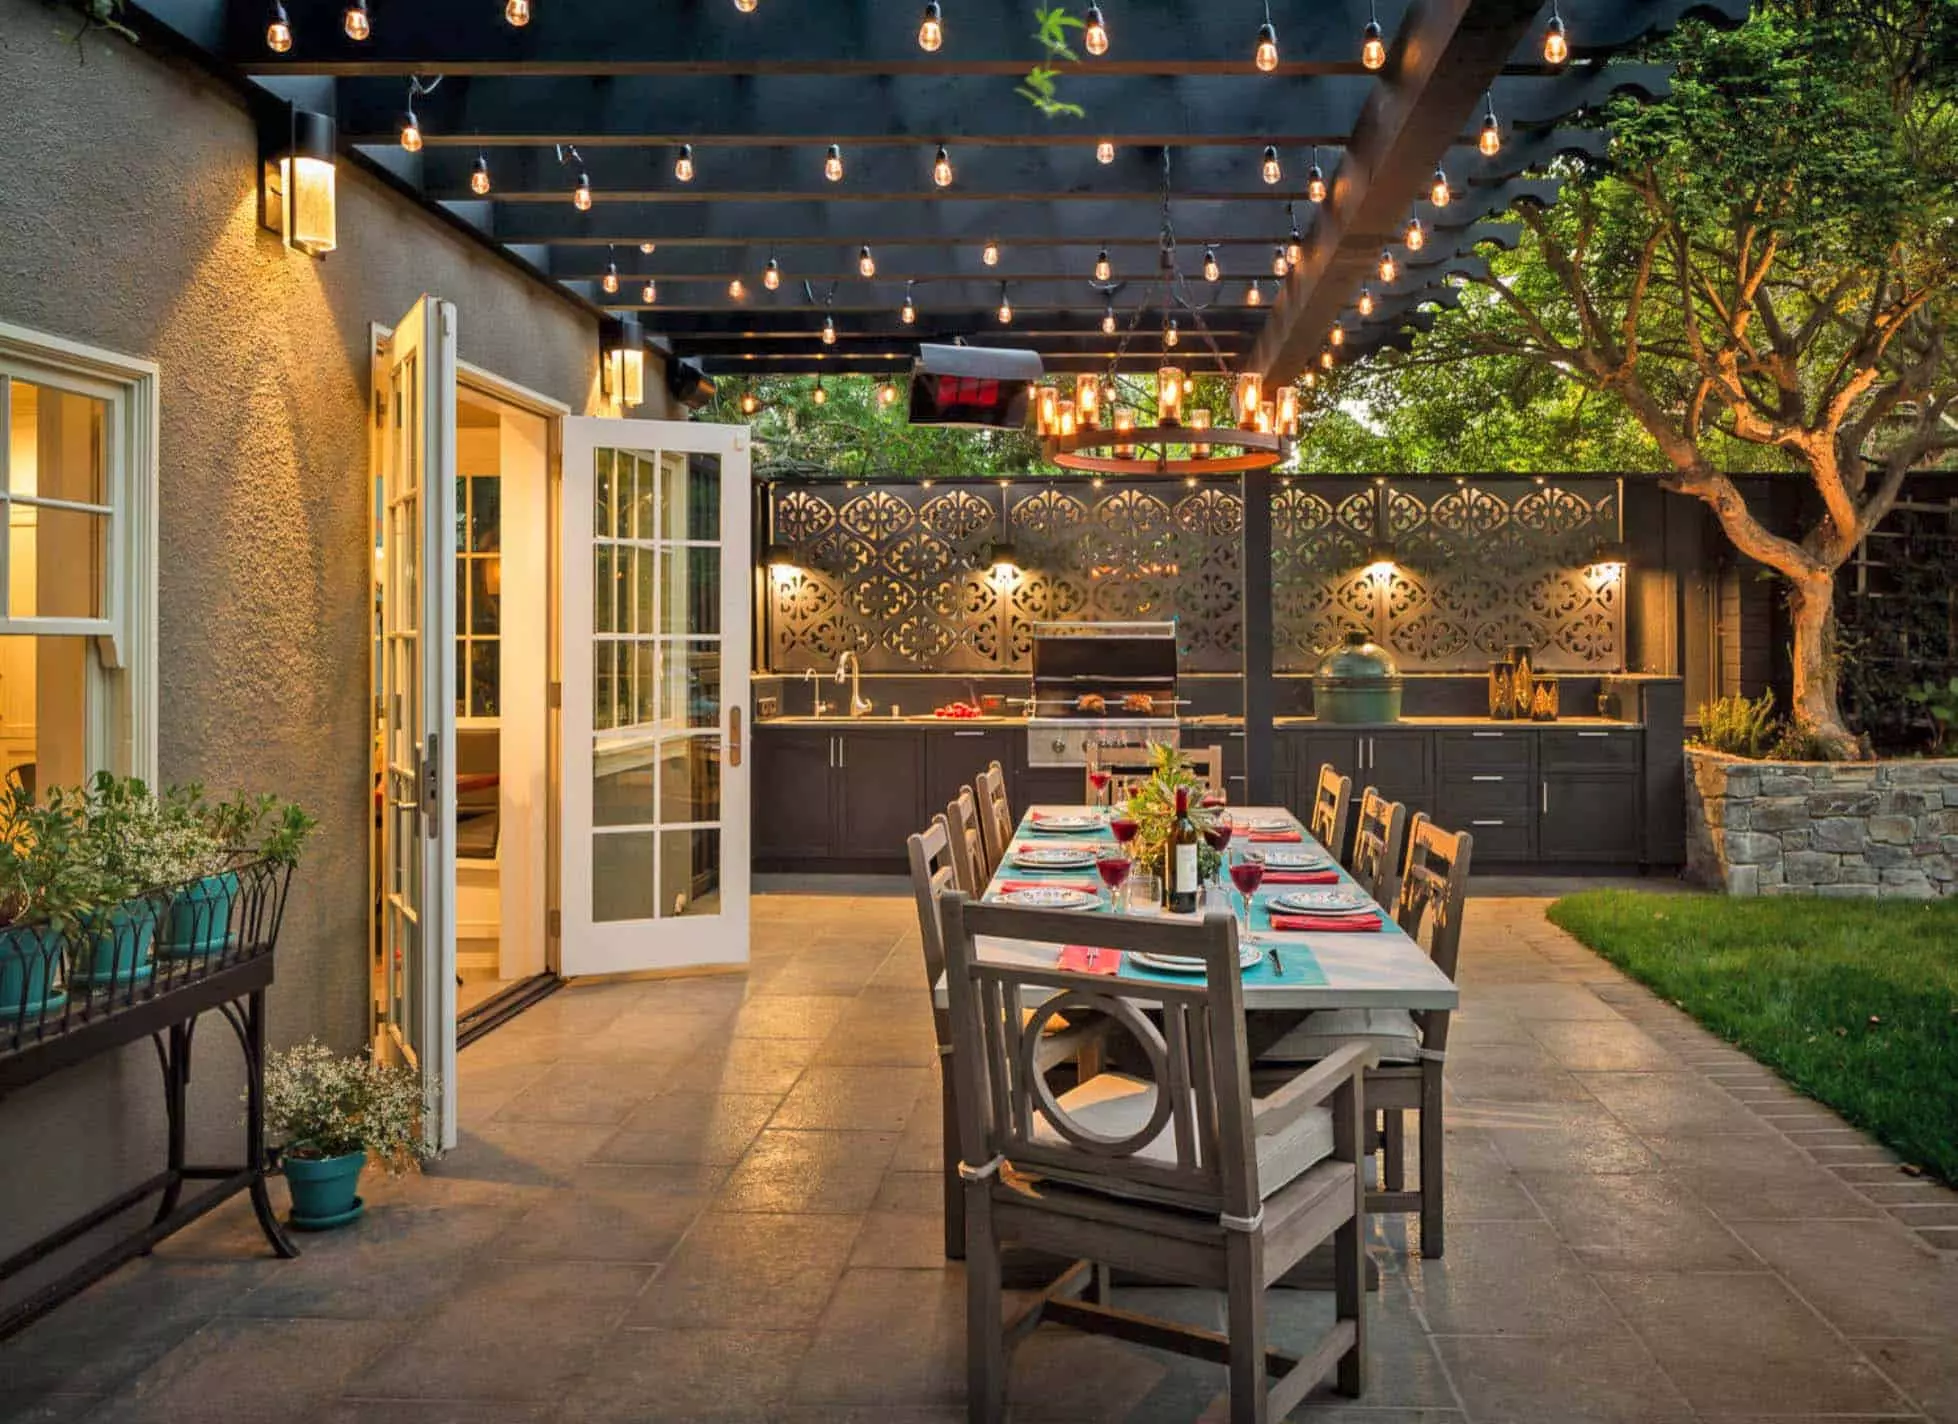 Outdoor dining area with kitchen and pergola